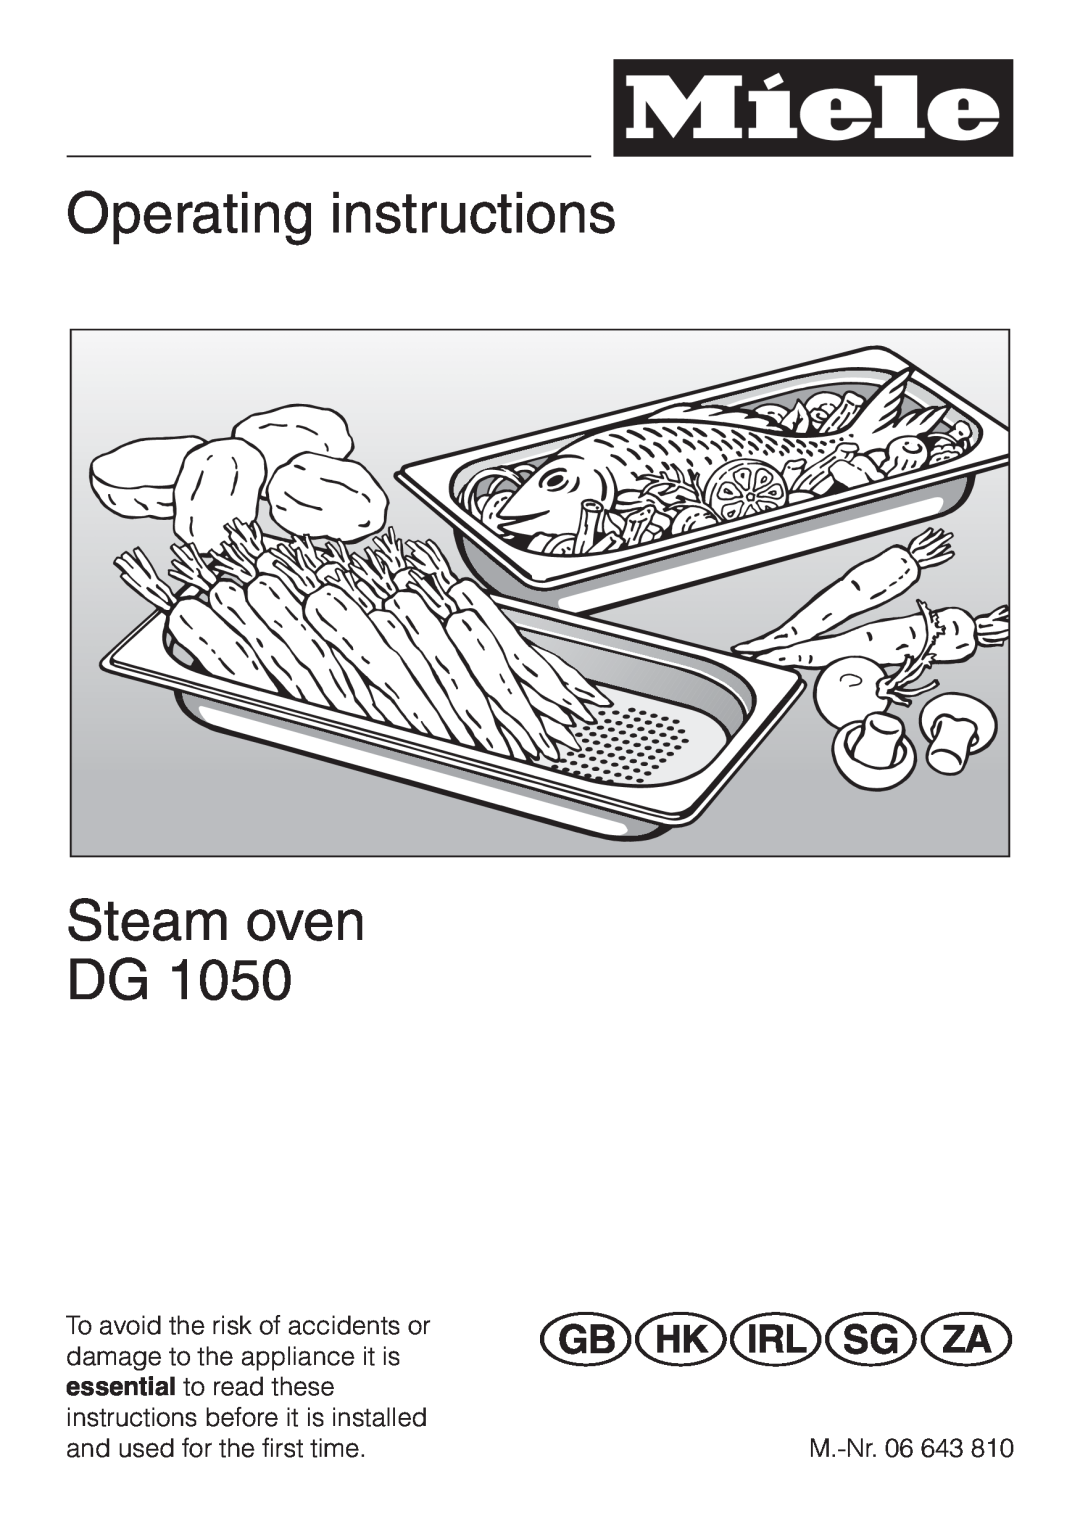 Miele DG 1050 manual Operating instructions Steam oven DG, GHirZ 